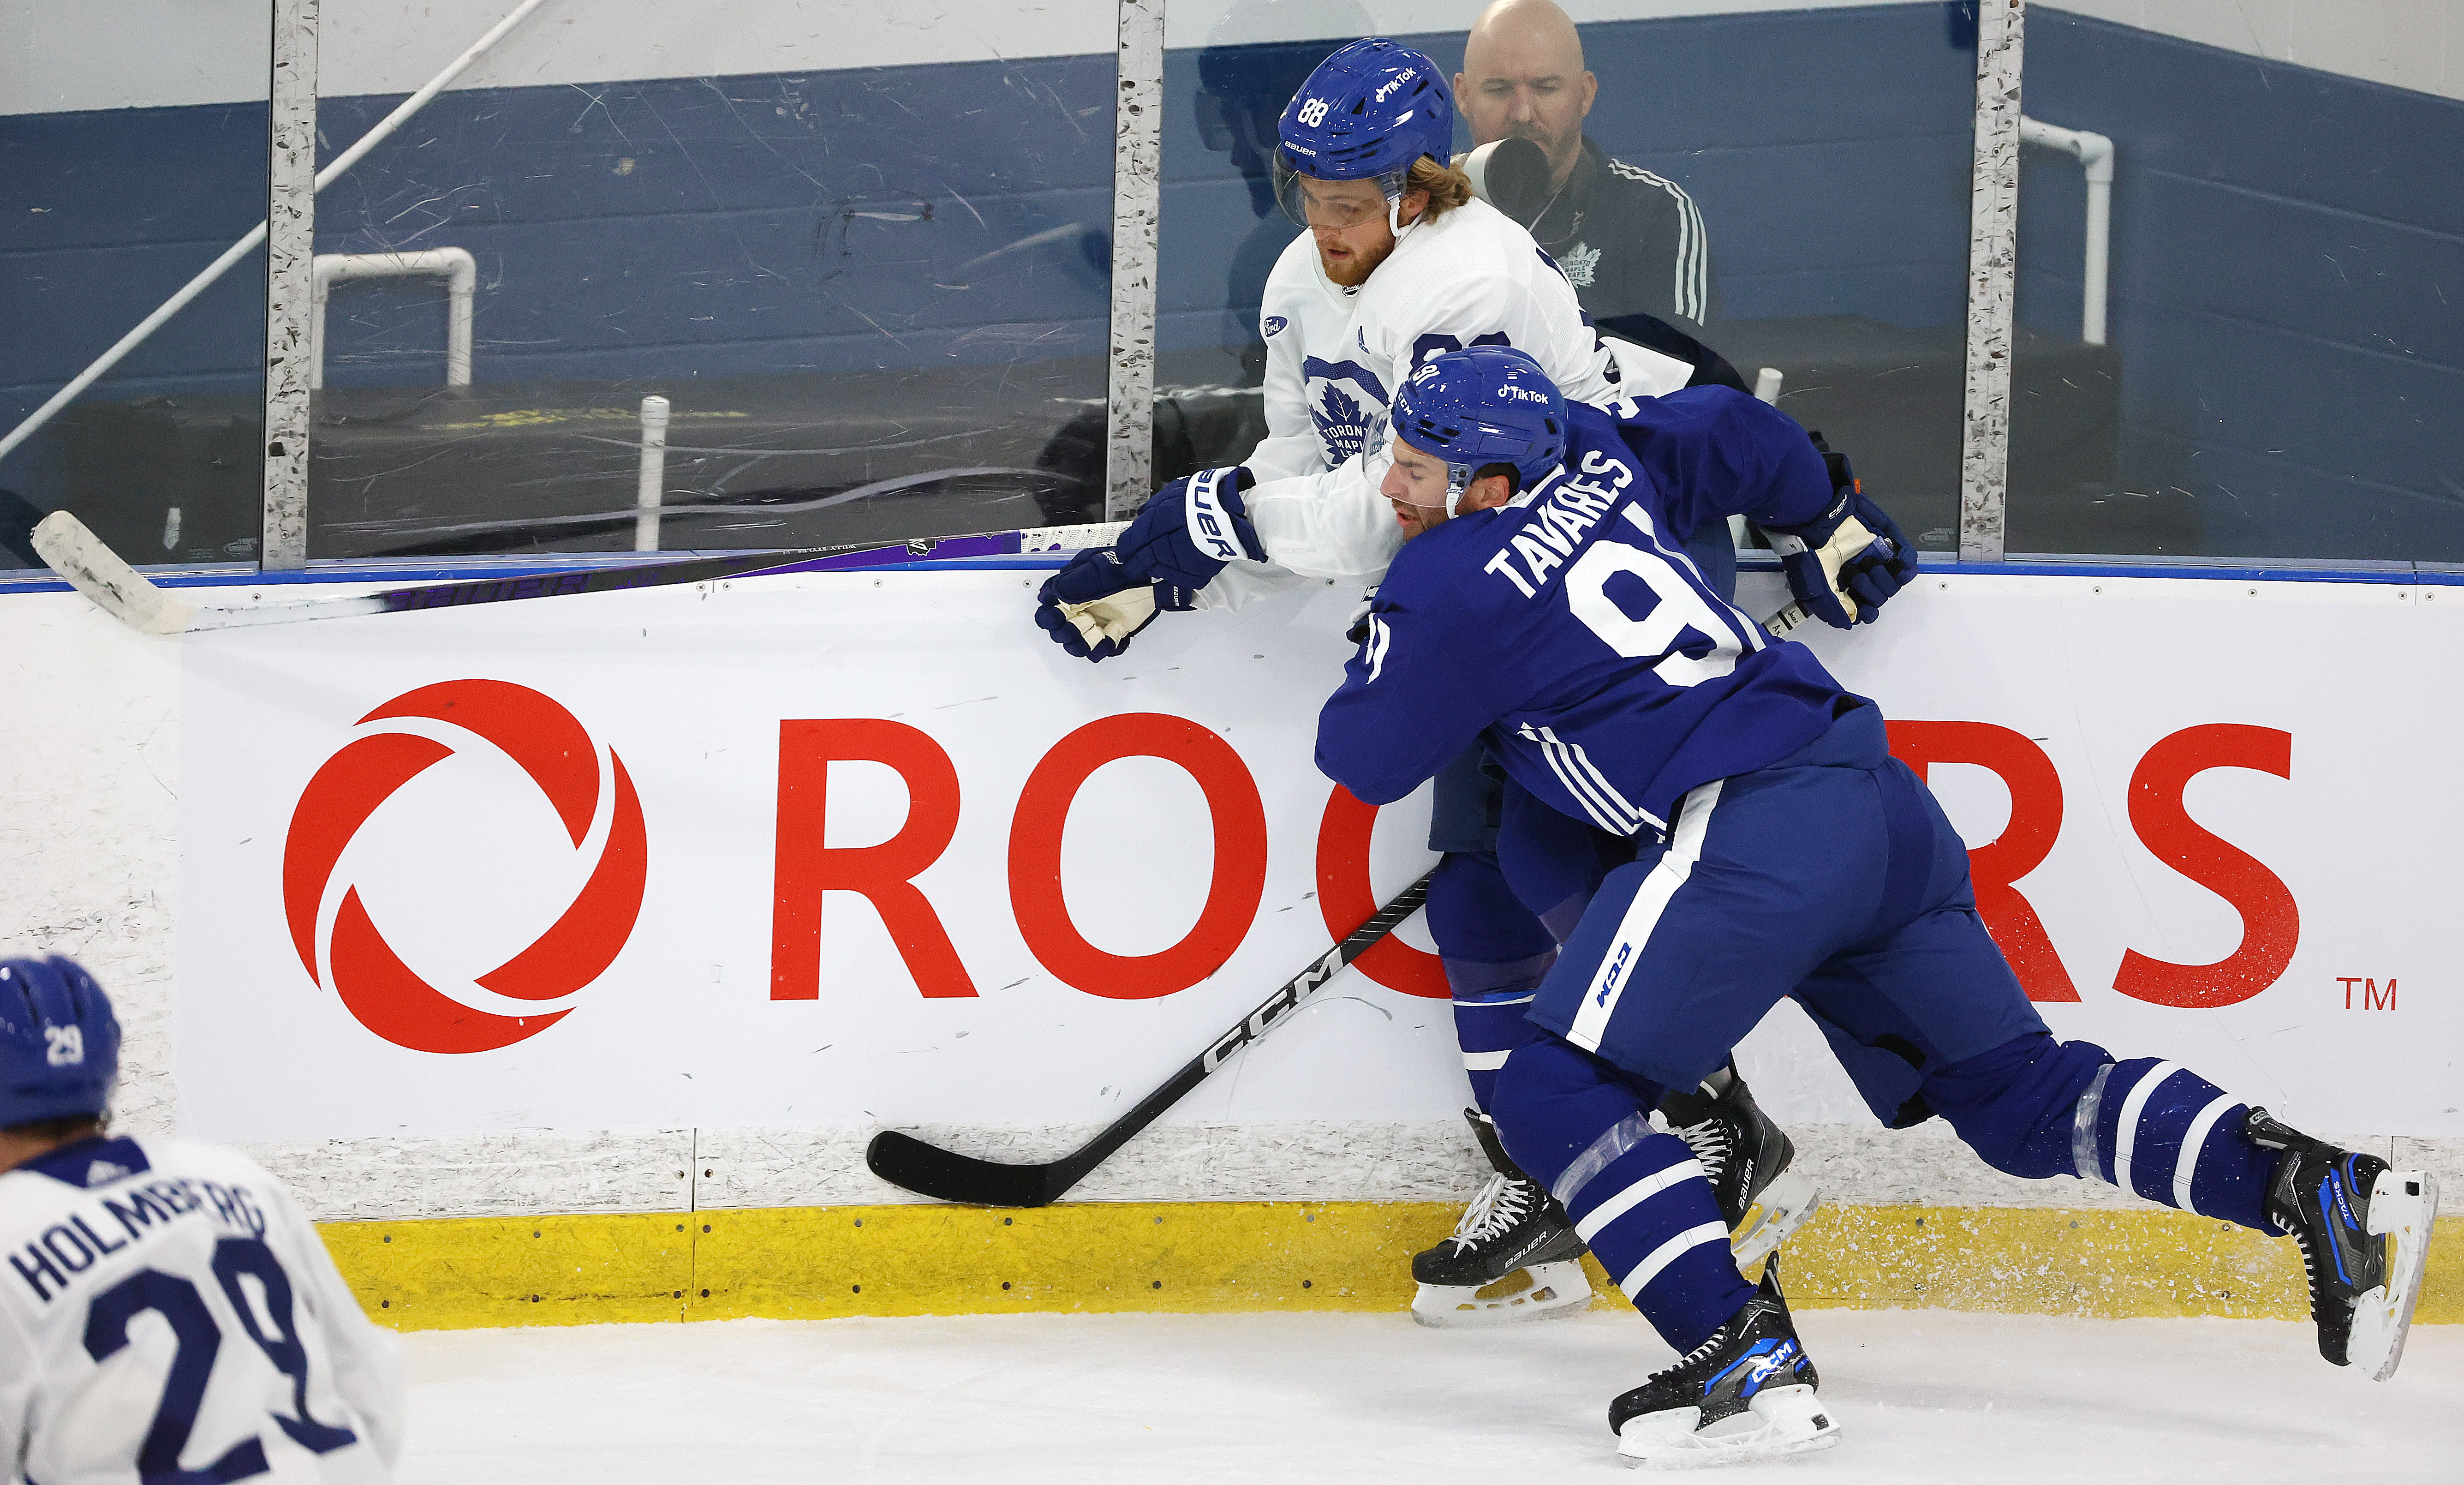 Toronto Maple Leafs open their training camp for the 2022-23 season